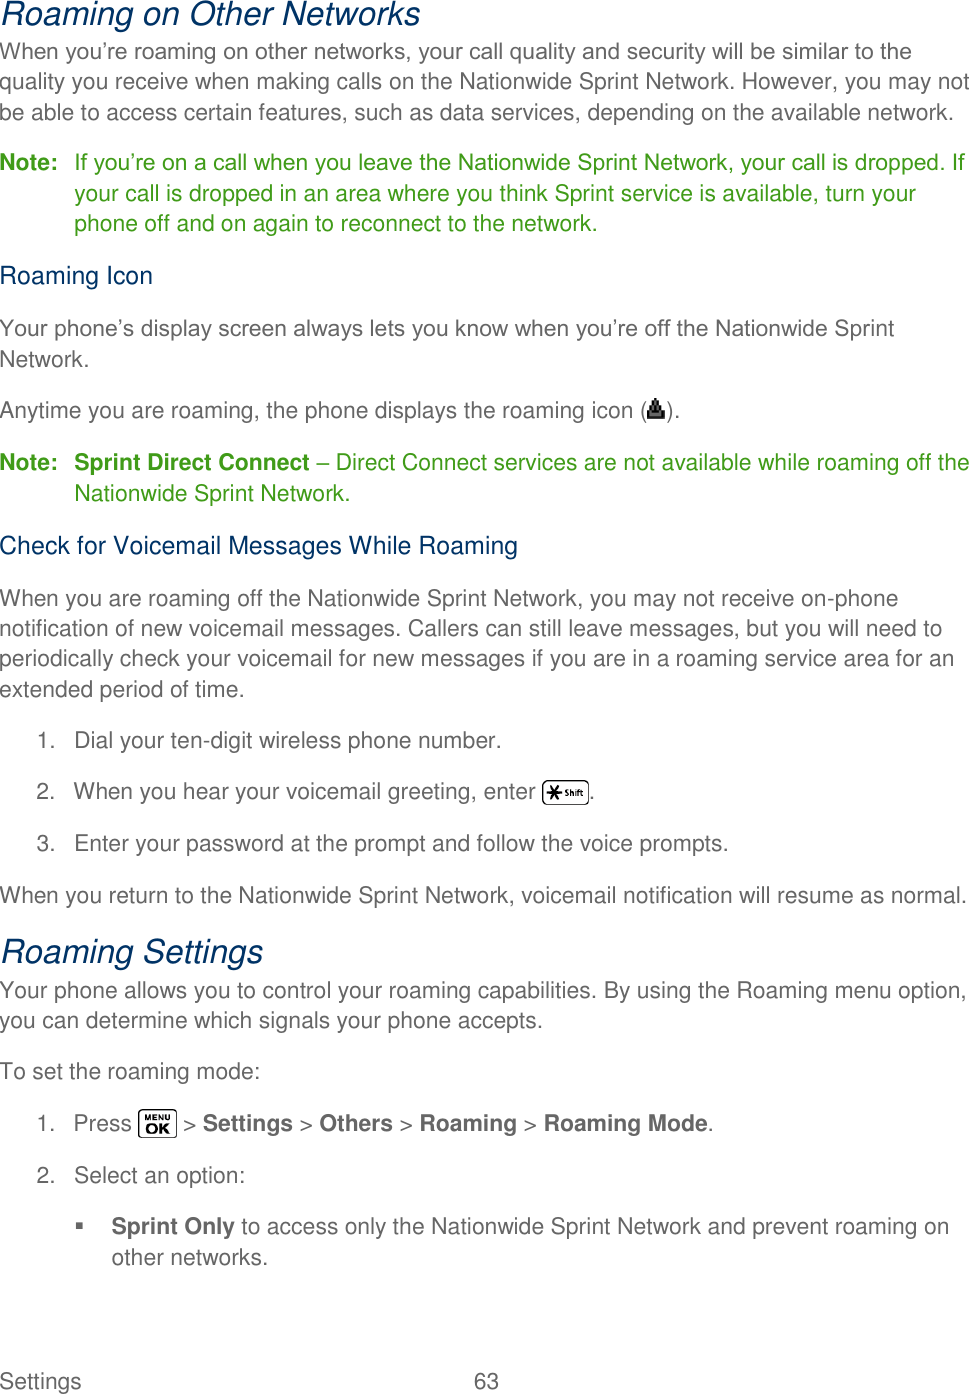  Settings  63   Roaming on Other Networks When you‘re roaming on other networks, your call quality and security will be similar to the quality you receive when making calls on the Nationwide Sprint Network. However, you may not be able to access certain features, such as data services, depending on the available network. Note: If you‘re on a call when you leave the Nationwide Sprint Network, your call is dropped. If your call is dropped in an area where you think Sprint service is available, turn your phone off and on again to reconnect to the network. Roaming Icon Your phone‘s display screen always lets you know when you‘re off the Nationwide Sprint Network. Anytime you are roaming, the phone displays the roaming icon ( ). Note: Sprint Direct Connect – Direct Connect services are not available while roaming off the Nationwide Sprint Network. Check for Voicemail Messages While Roaming When you are roaming off the Nationwide Sprint Network, you may not receive on-phone notification of new voicemail messages. Callers can still leave messages, but you will need to periodically check your voicemail for new messages if you are in a roaming service area for an extended period of time. 1.  Dial your ten-digit wireless phone number. 2.  When you hear your voicemail greeting, enter  . 3.  Enter your password at the prompt and follow the voice prompts. When you return to the Nationwide Sprint Network, voicemail notification will resume as normal. Roaming Settings Your phone allows you to control your roaming capabilities. By using the Roaming menu option, you can determine which signals your phone accepts. To set the roaming mode: 1.  Press   &gt; Settings &gt; Others &gt; Roaming &gt; Roaming Mode. 2.  Select an option:  Sprint Only to access only the Nationwide Sprint Network and prevent roaming on other networks. 